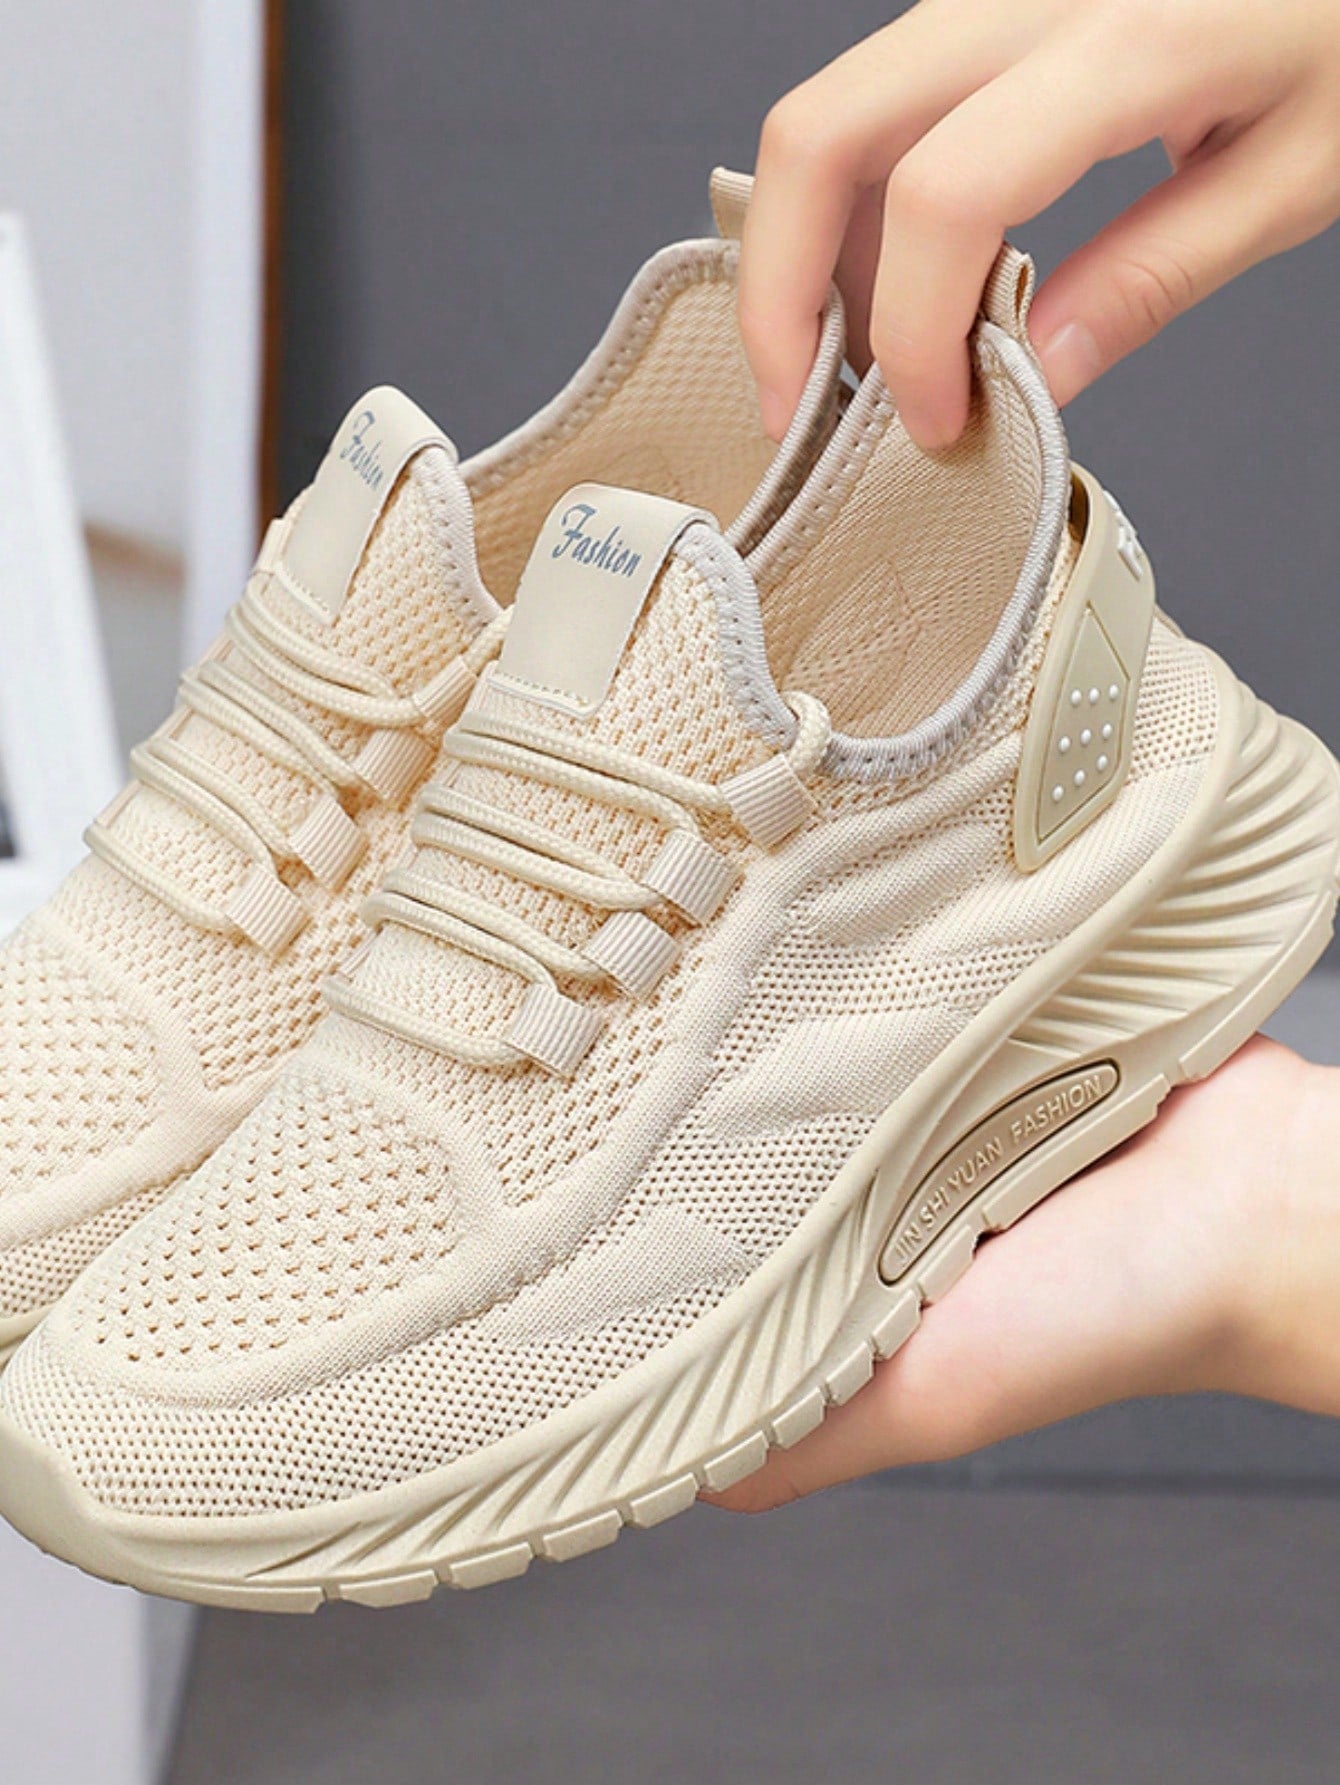 New Season Running Shoes For Women, Lightweight, Comfortable, Shock-Absorbing, Non-Slip, Breathable, Knitted, Casual Athletic Sneakers, Walking Shoes-Beige-2